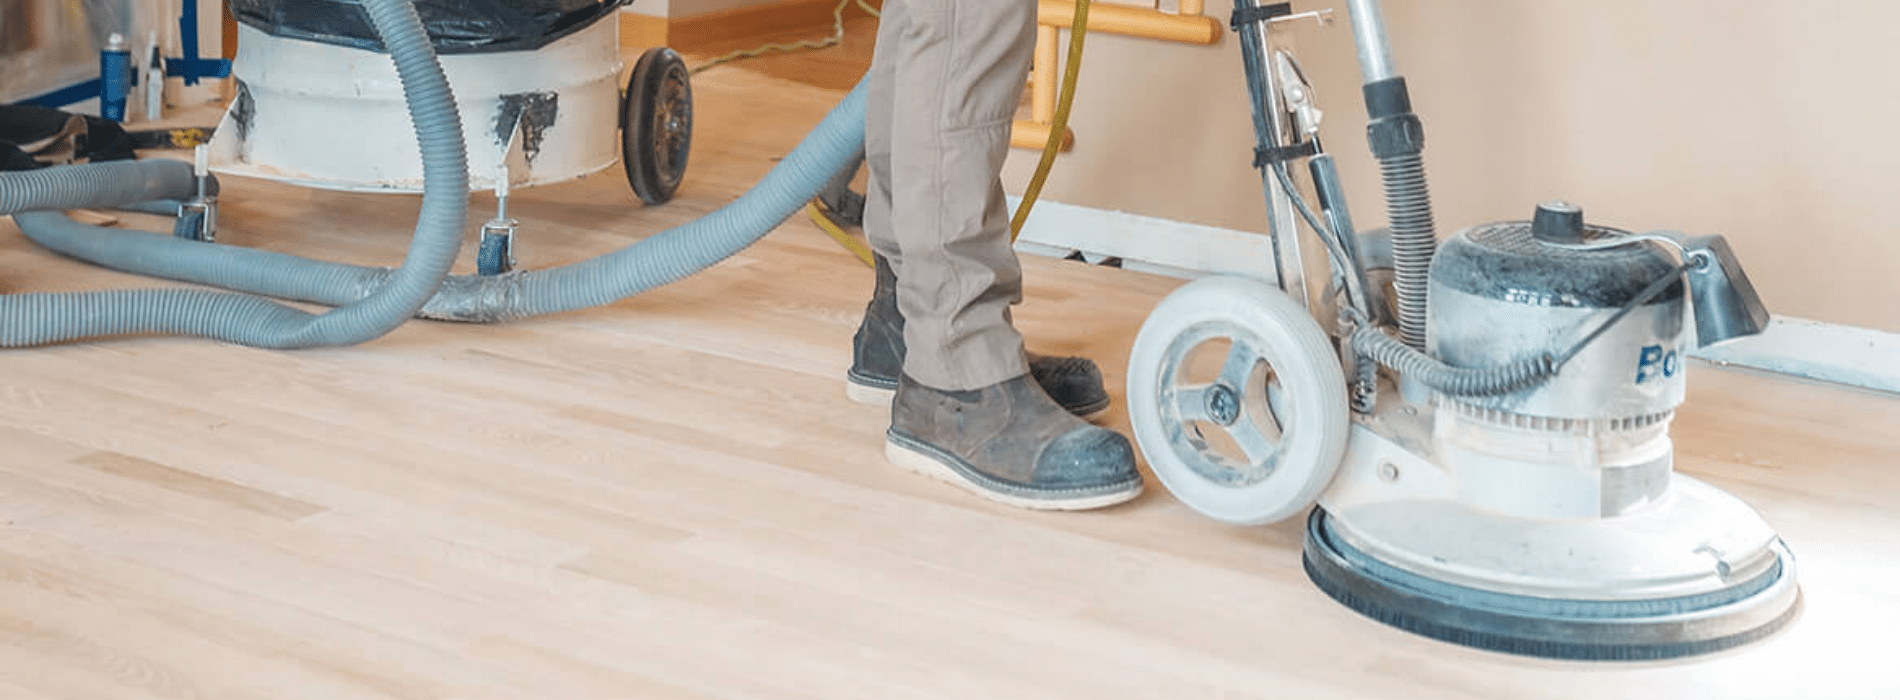 Expert floor sanding in action on a herringbone pattern floor in Aldershot, GU11. A 2.2 kW Bona belt sander with a dust extraction system and HEPA filter is used by the Premier Floor Sanding team to ensure a clean and efficient restoration process.